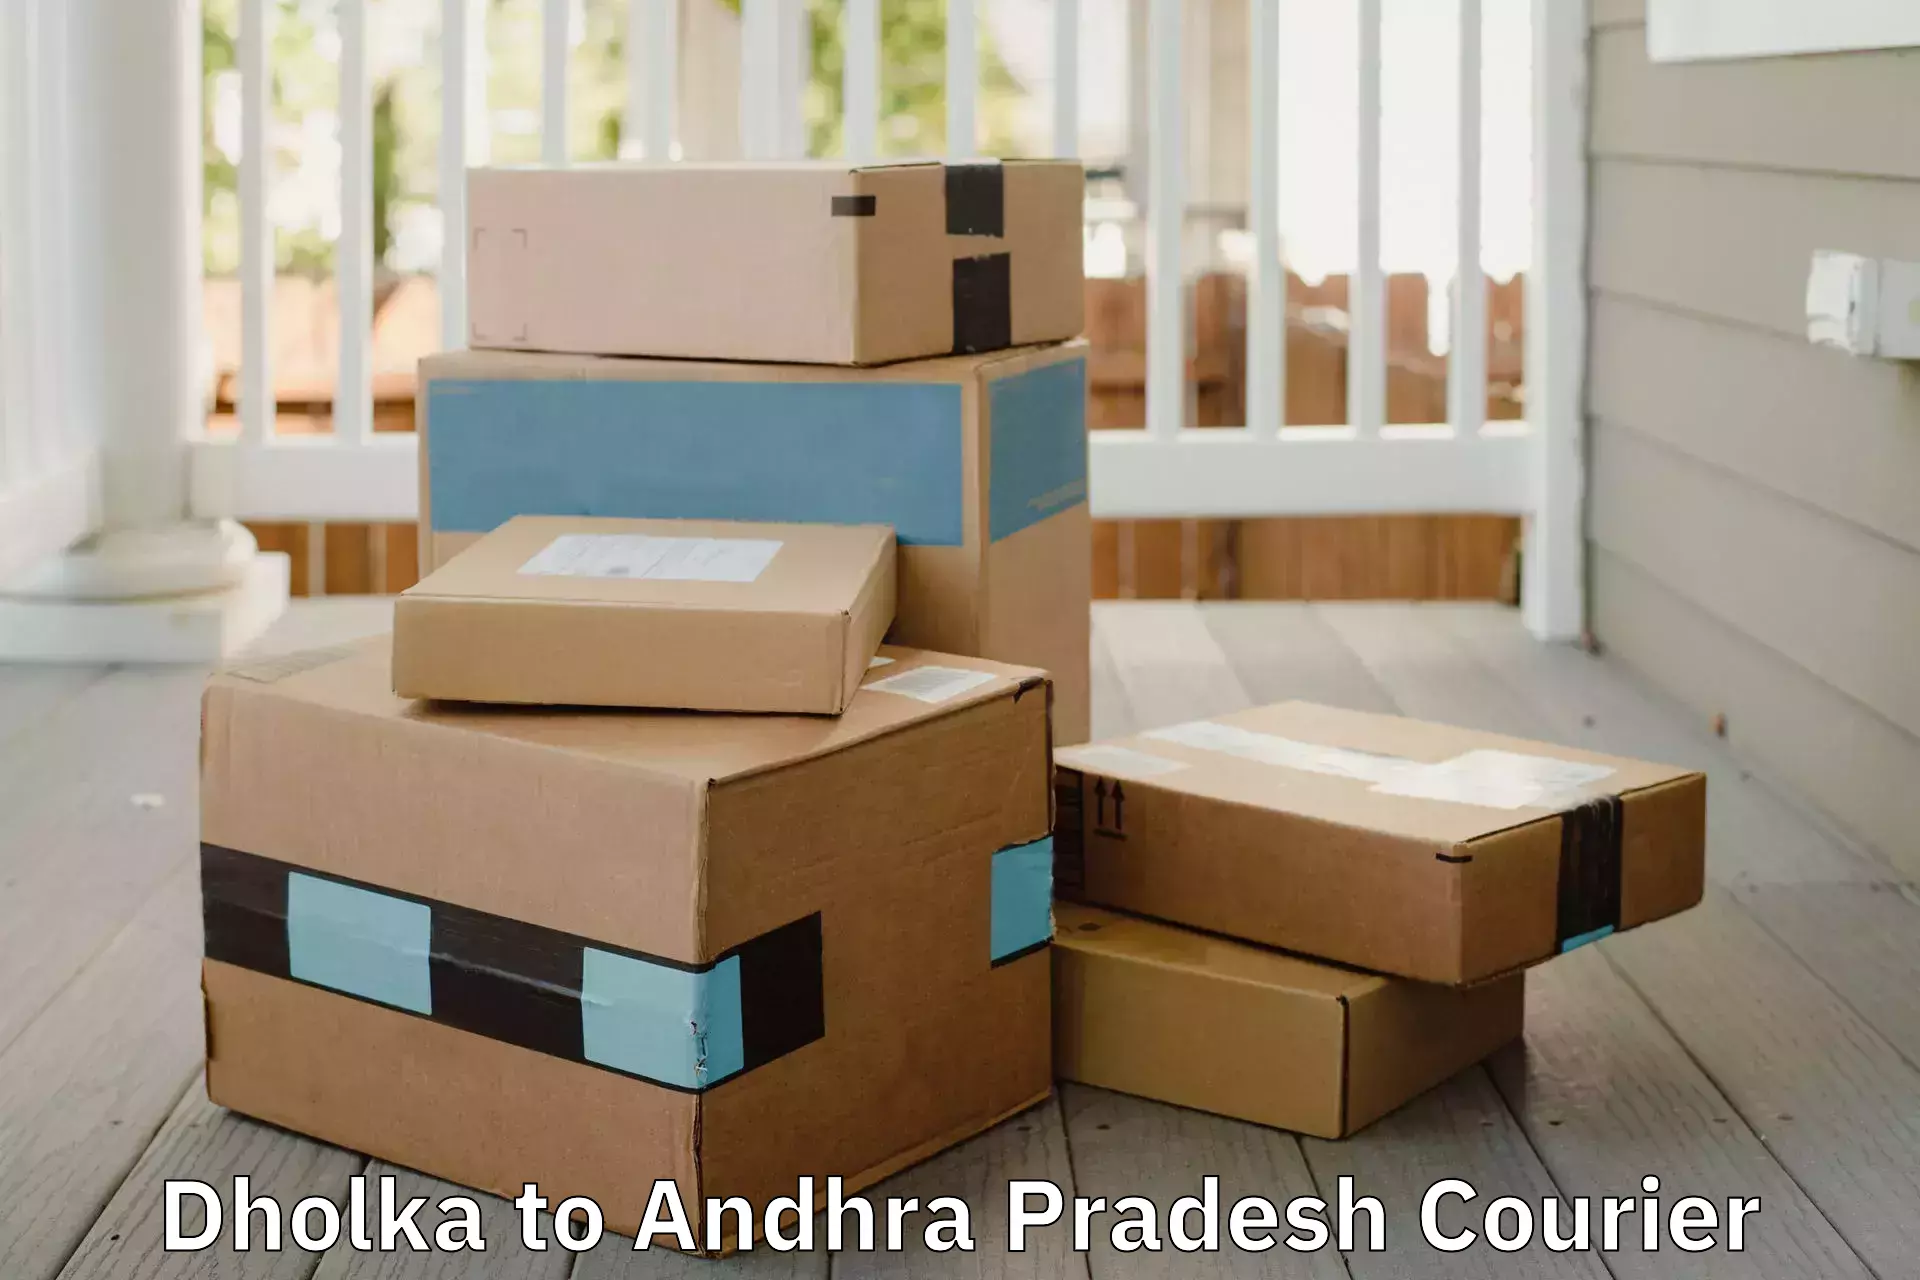 Trusted relocation experts Dholka to Visakhapatnam Port